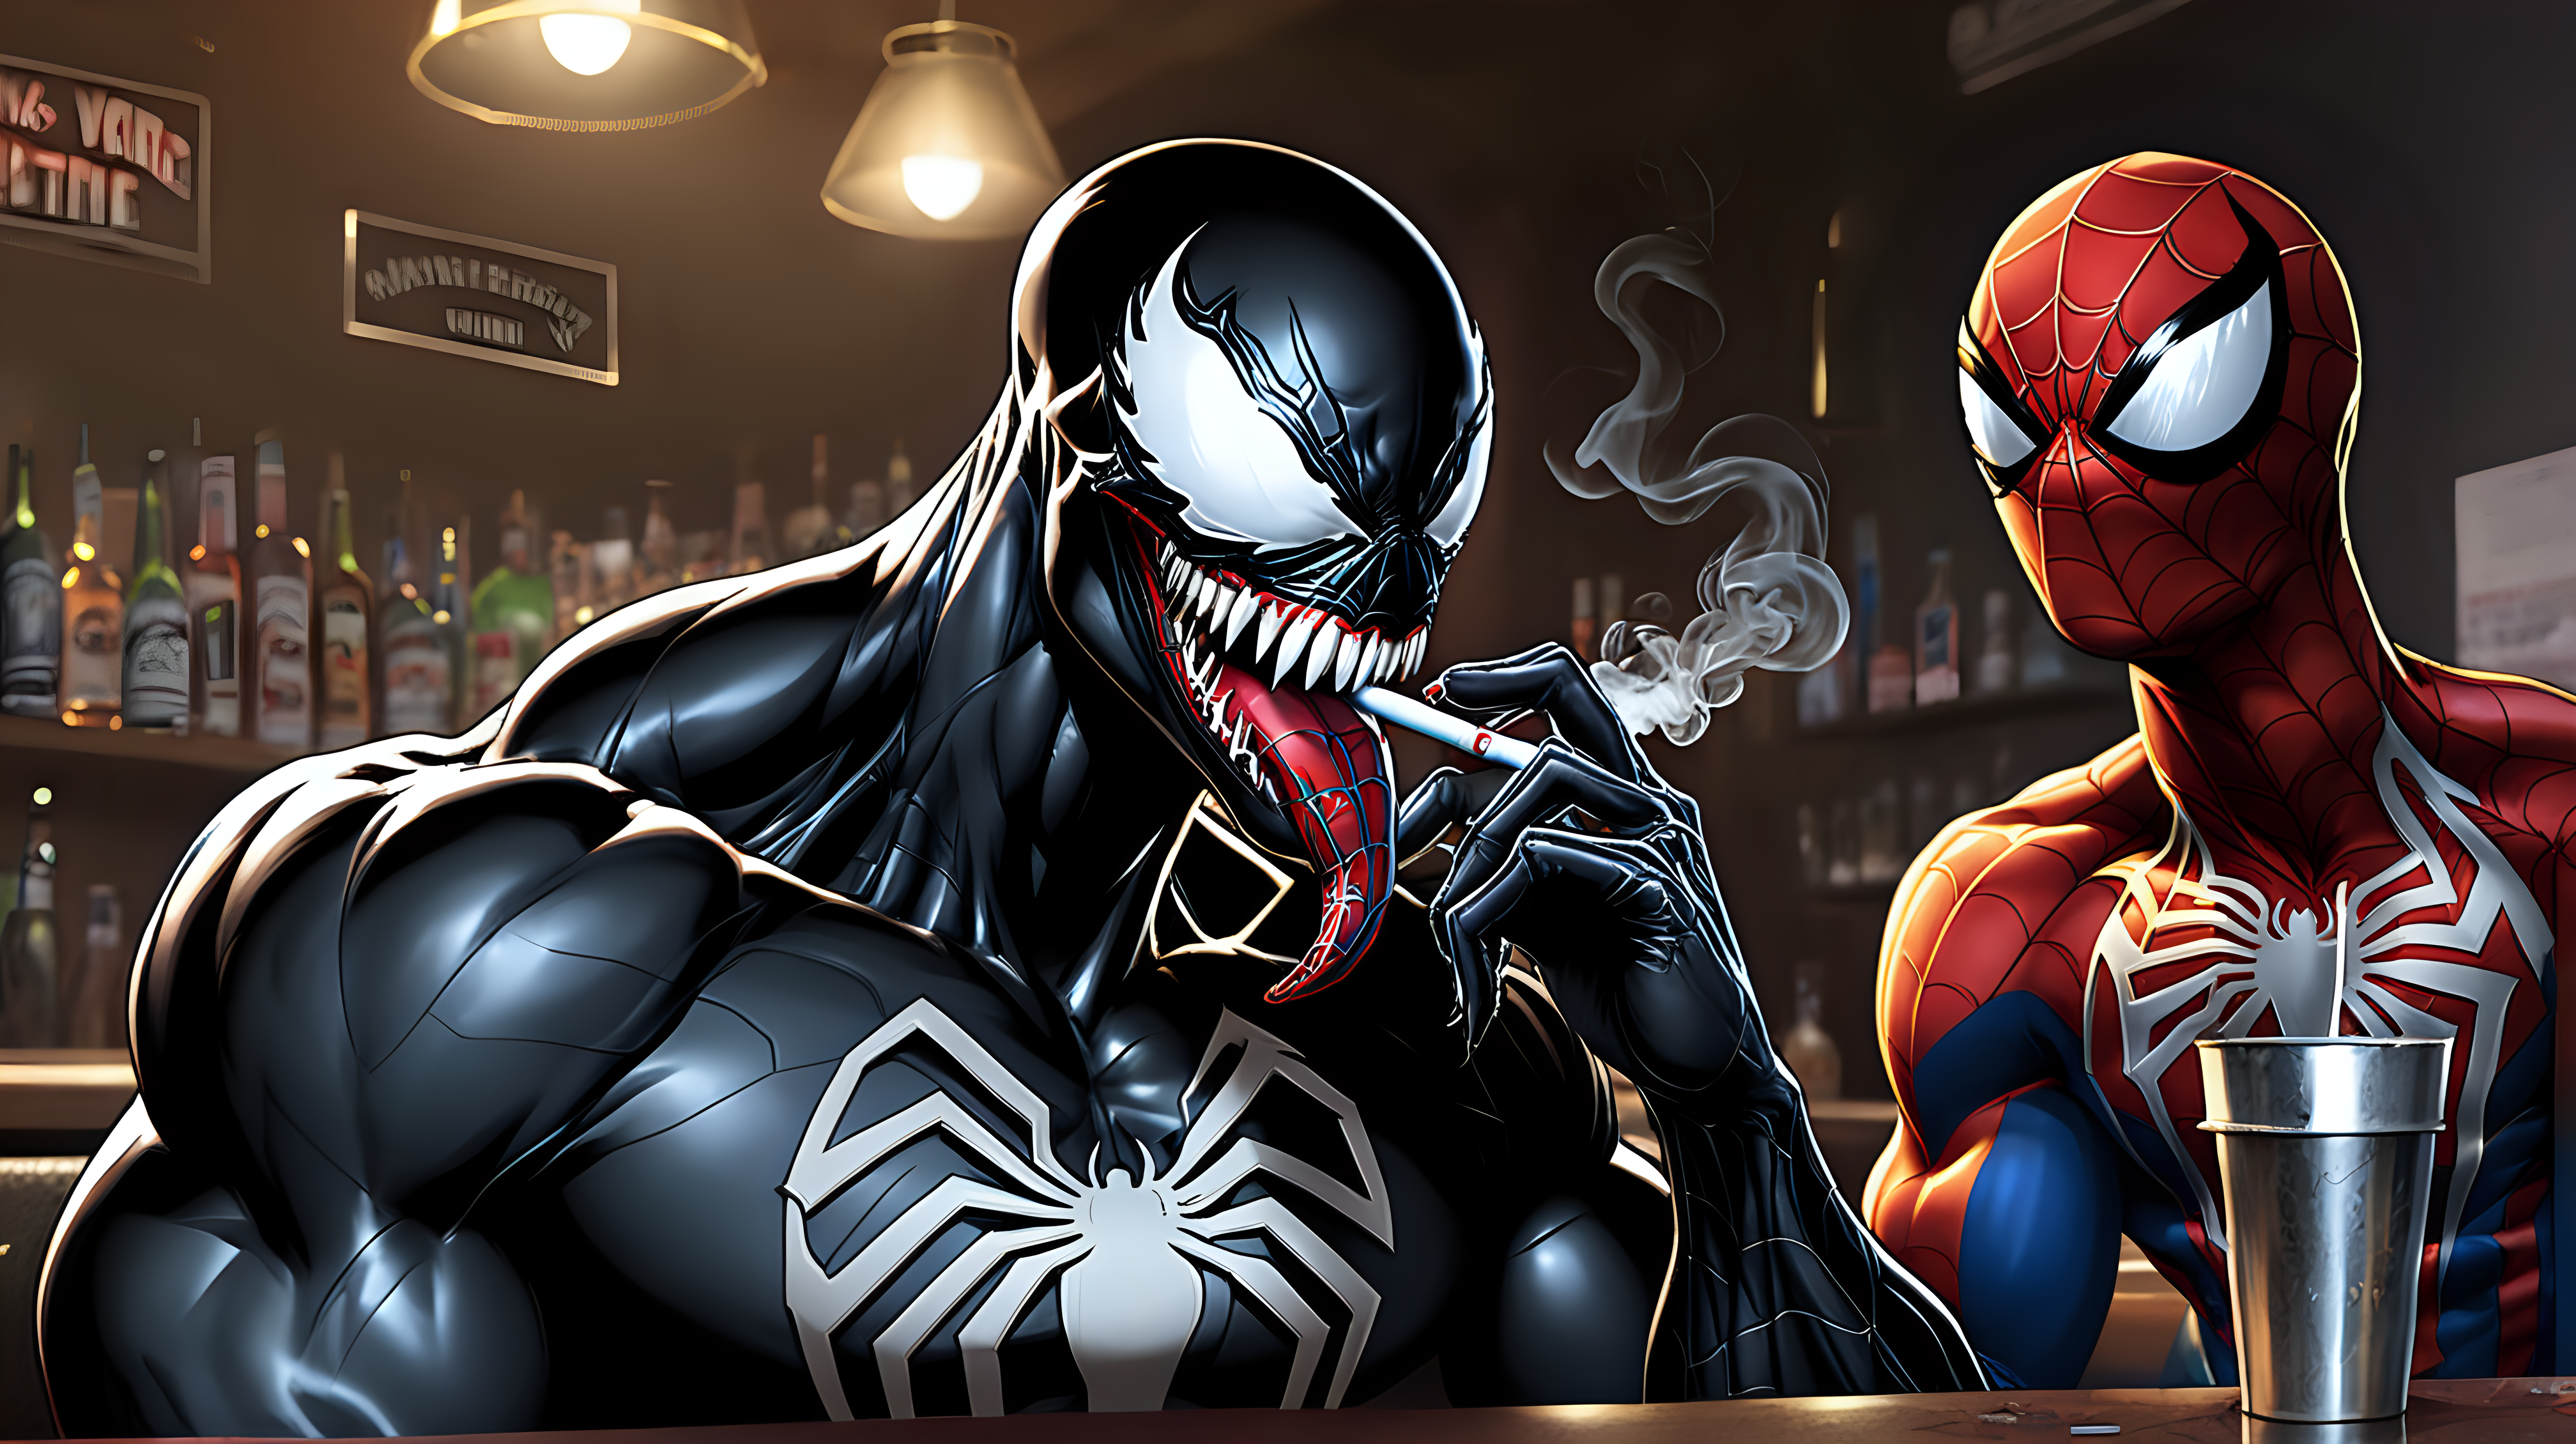 Venom smoking a joint at a bar with